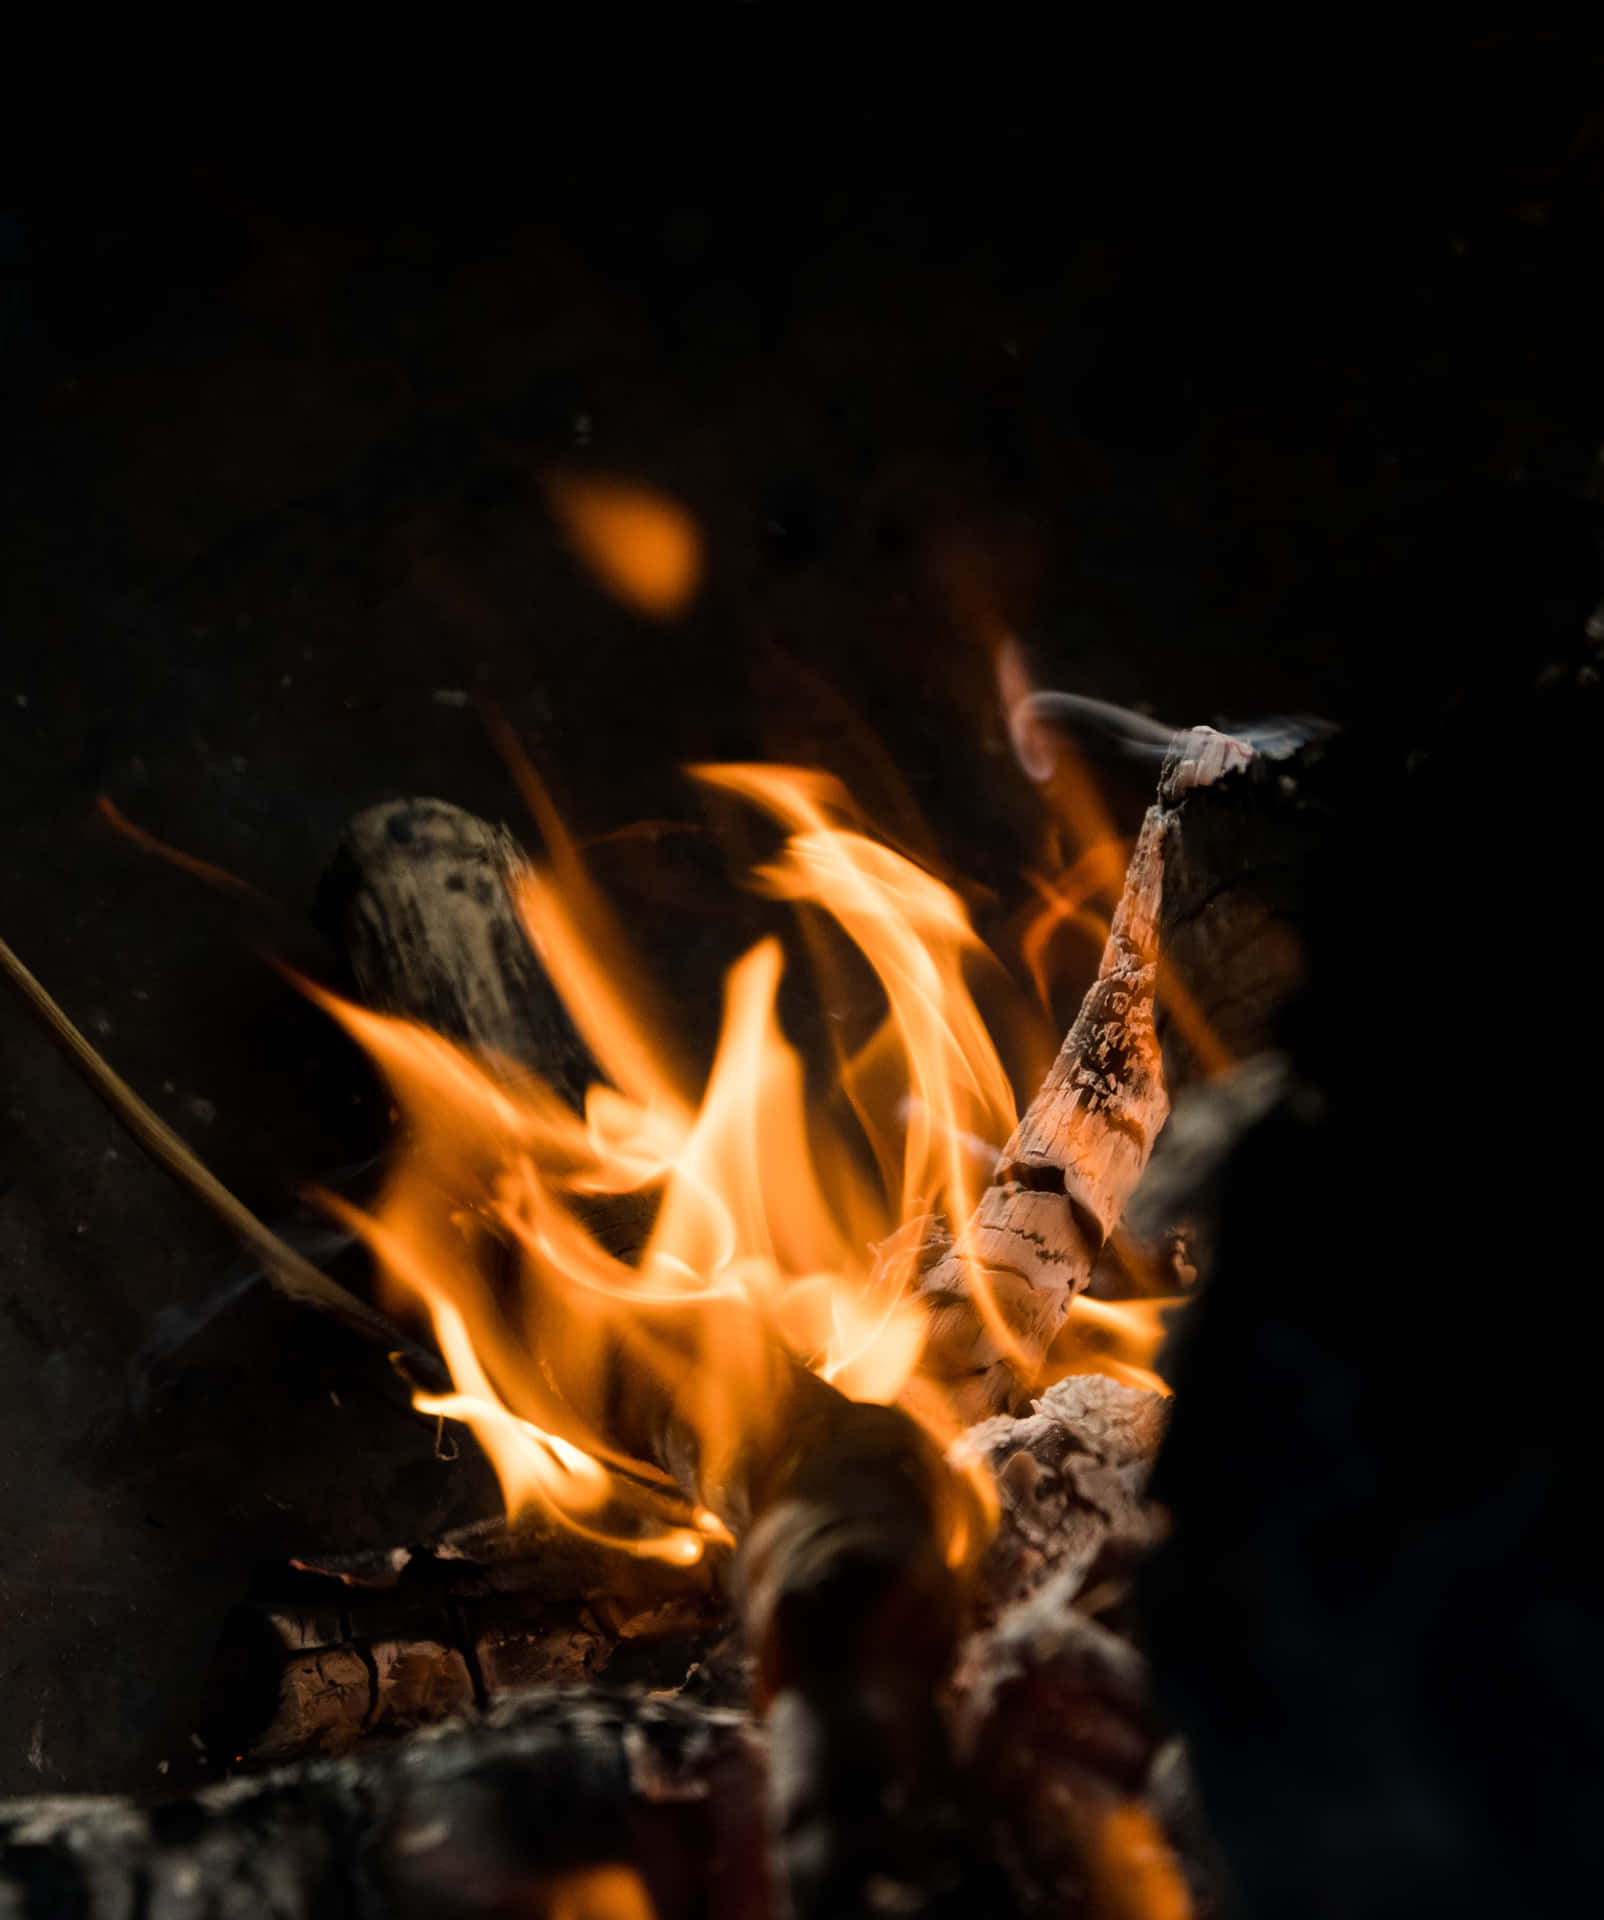 A Close Up Of A Fire With Logs And Flames